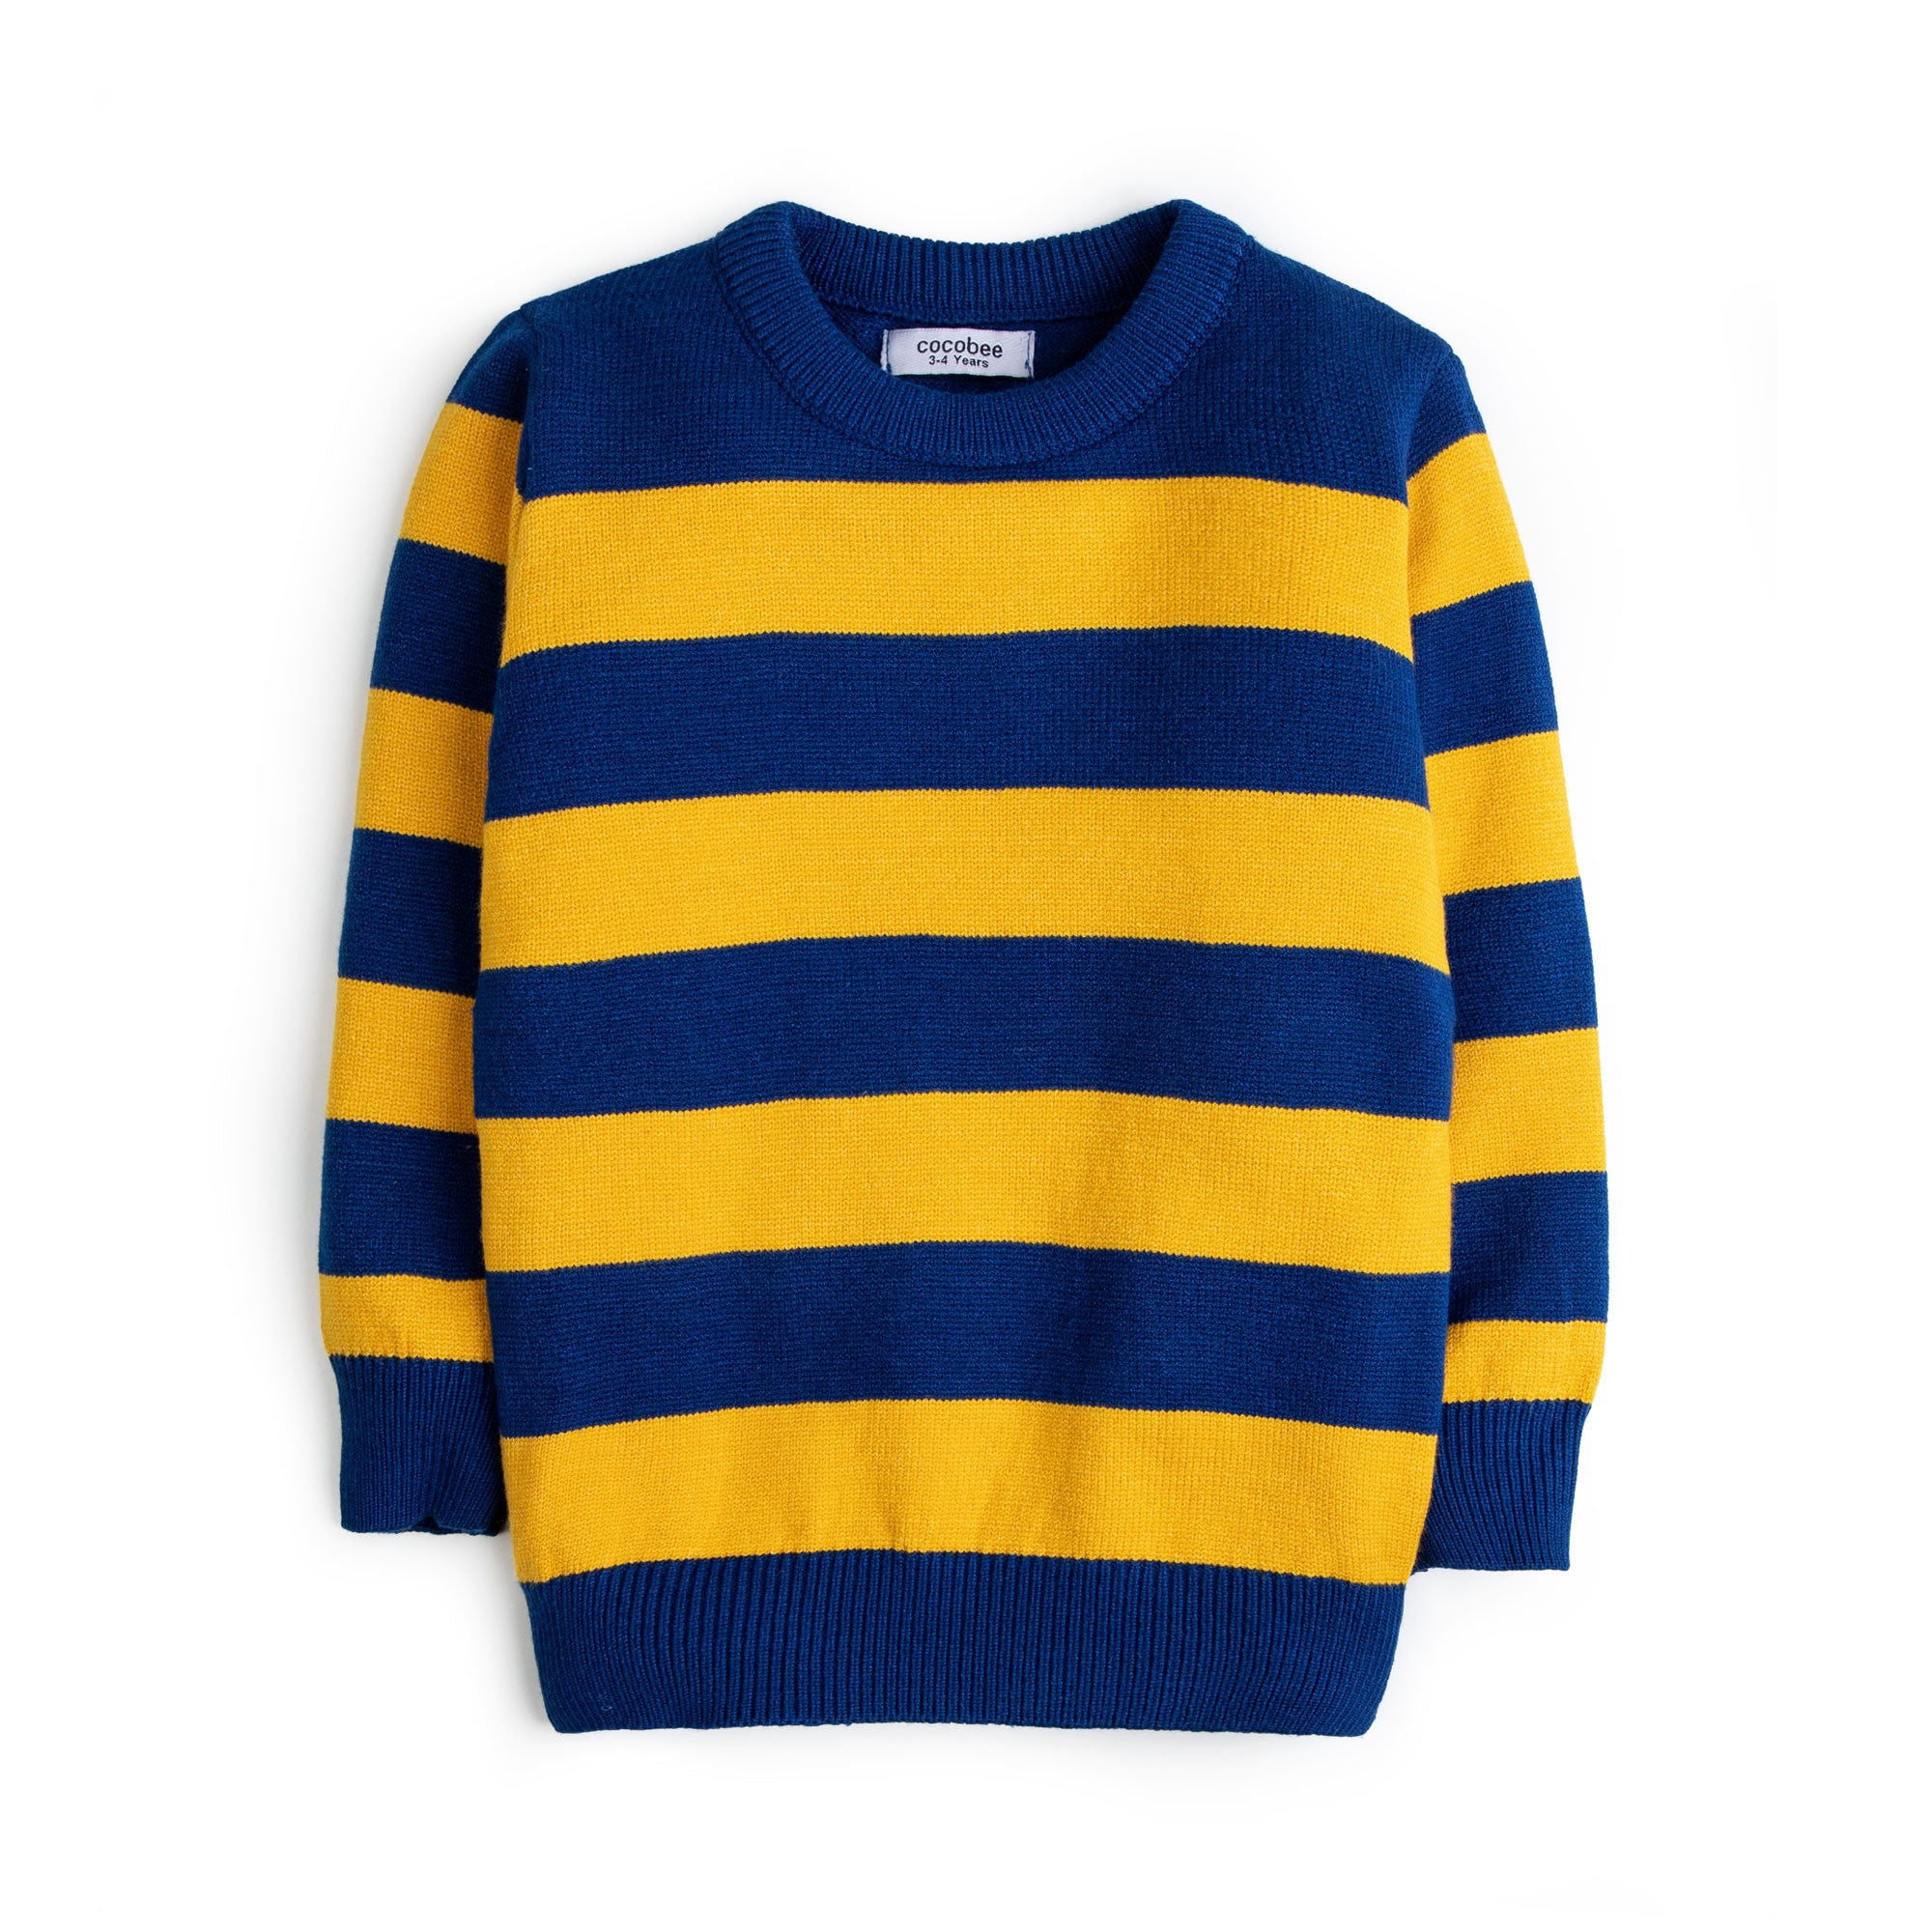 Two Tone Knitted Sweater